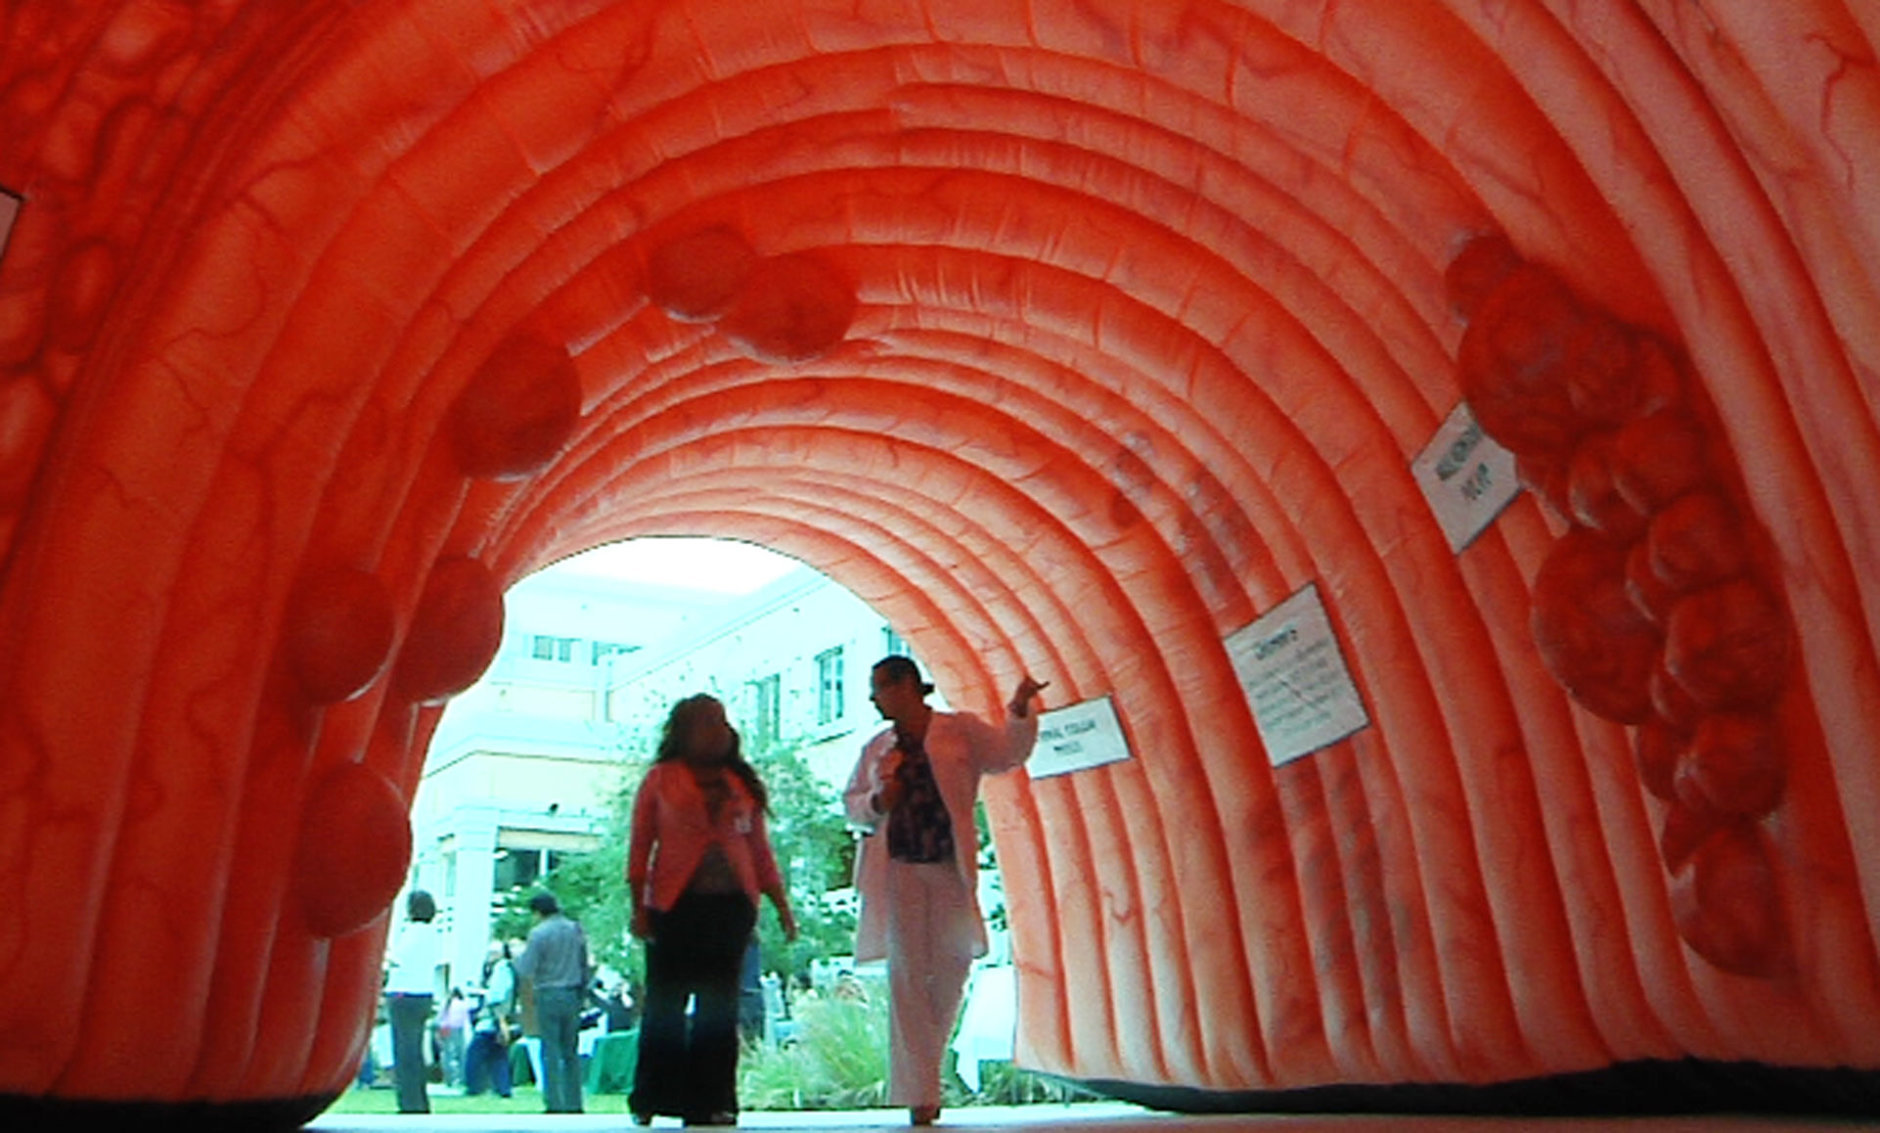 A Sylvester Comprehensive Cancer Center employee gives a tour inside a giant inflatable colon on display on the University of Miami Health System campus in Miami, Friday, March 22, 2013. The inflatable is part of the hospital's Colorectal Cancer Awareness Month community education outreach. (AP Photo/Suzette Laboy)